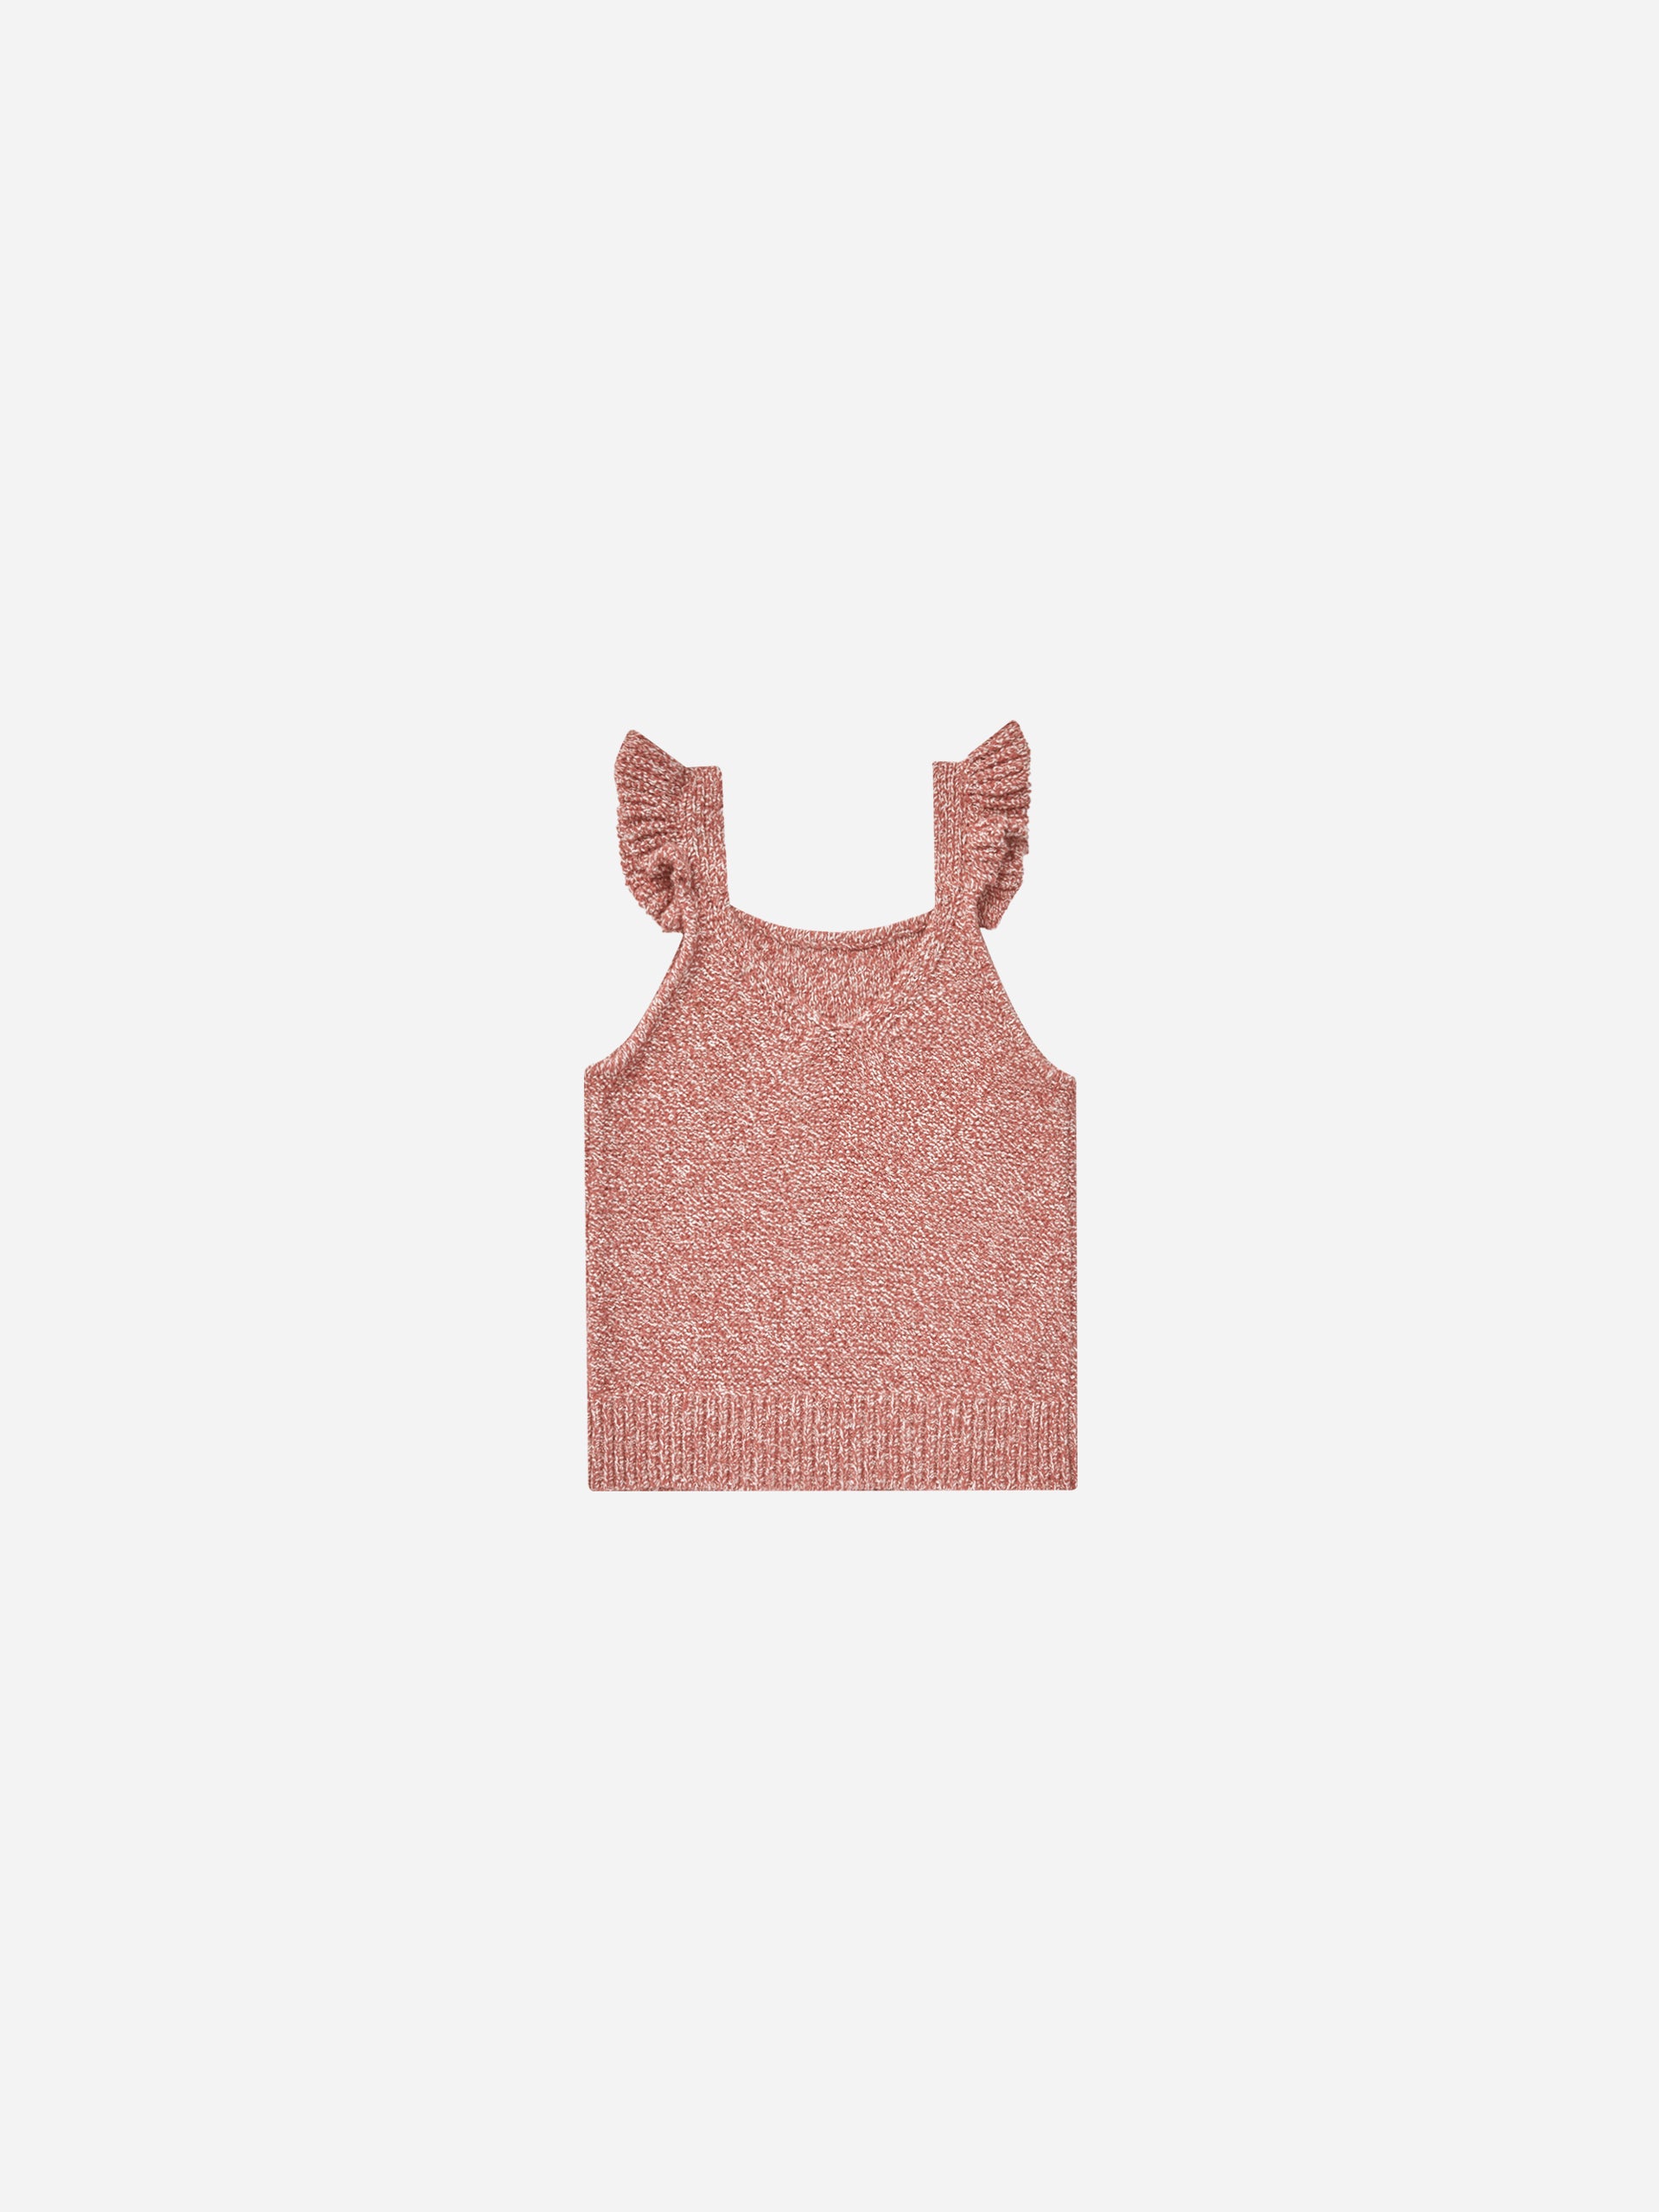 Knit Tank || Heathered Strawberry - Rylee + Cru | Kids Clothes | Trendy Baby Clothes | Modern Infant Outfits |